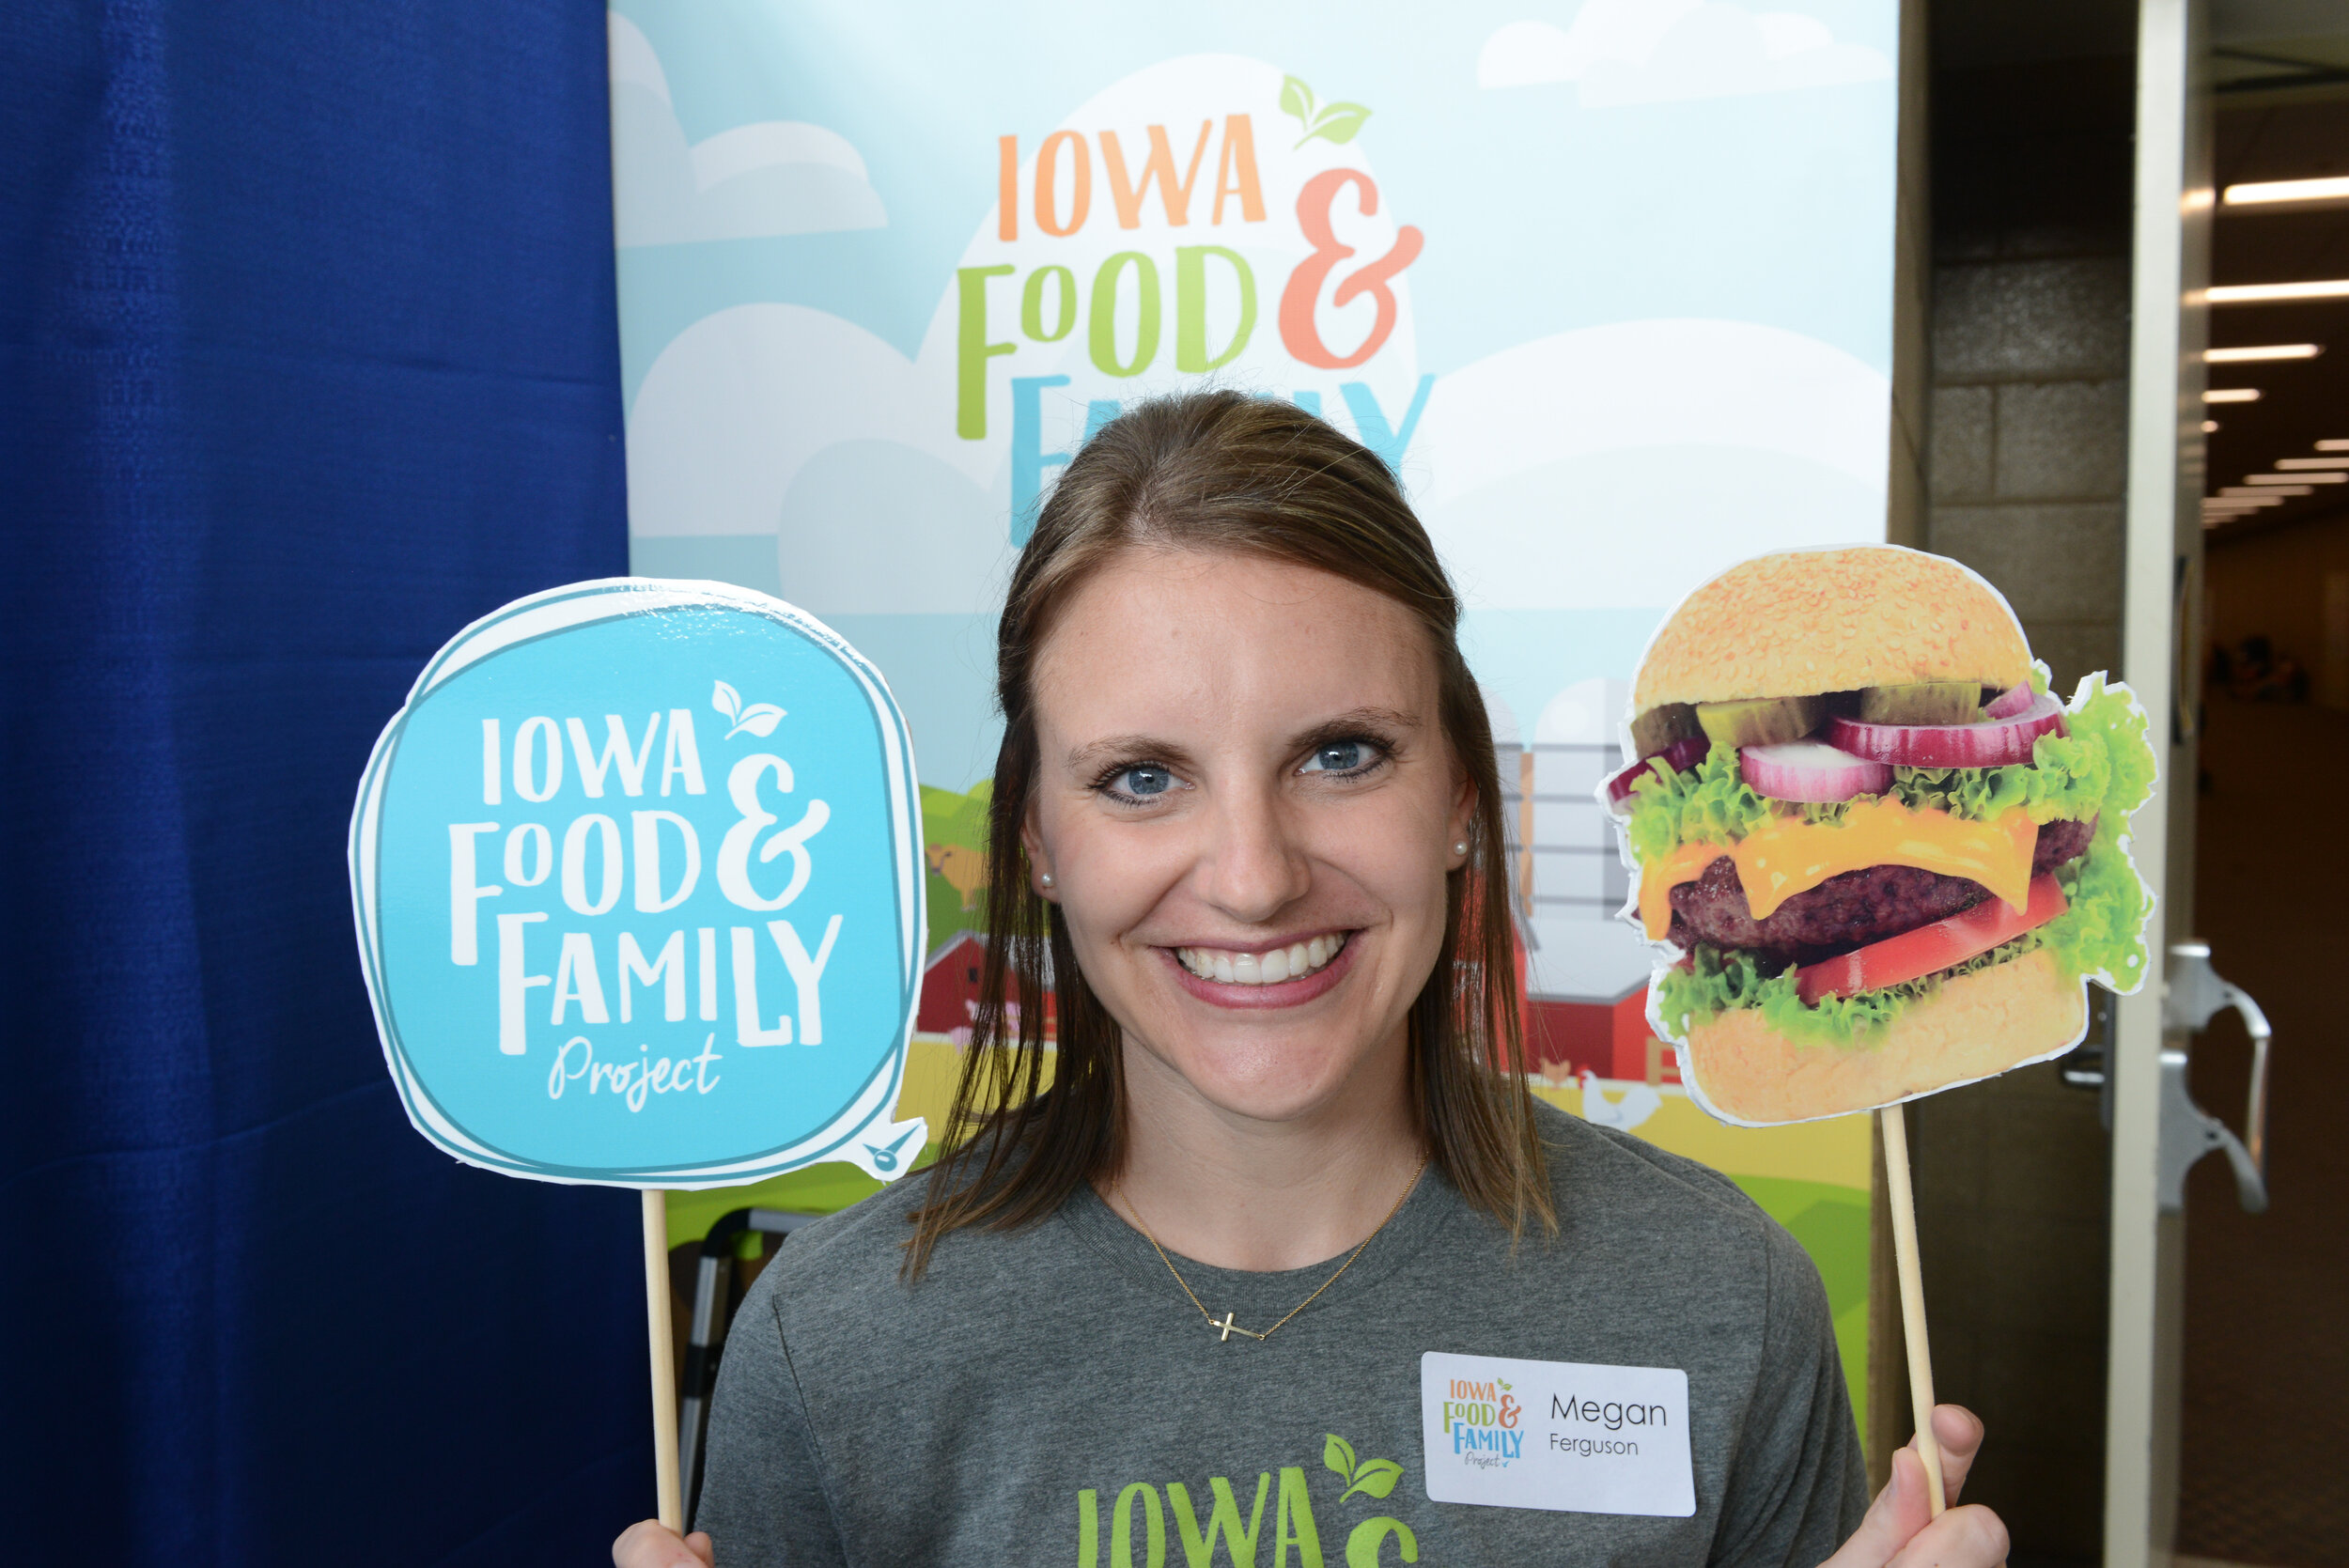 The 2017 fair included a fun food and farming photo booth provided by Midwest Dairy.